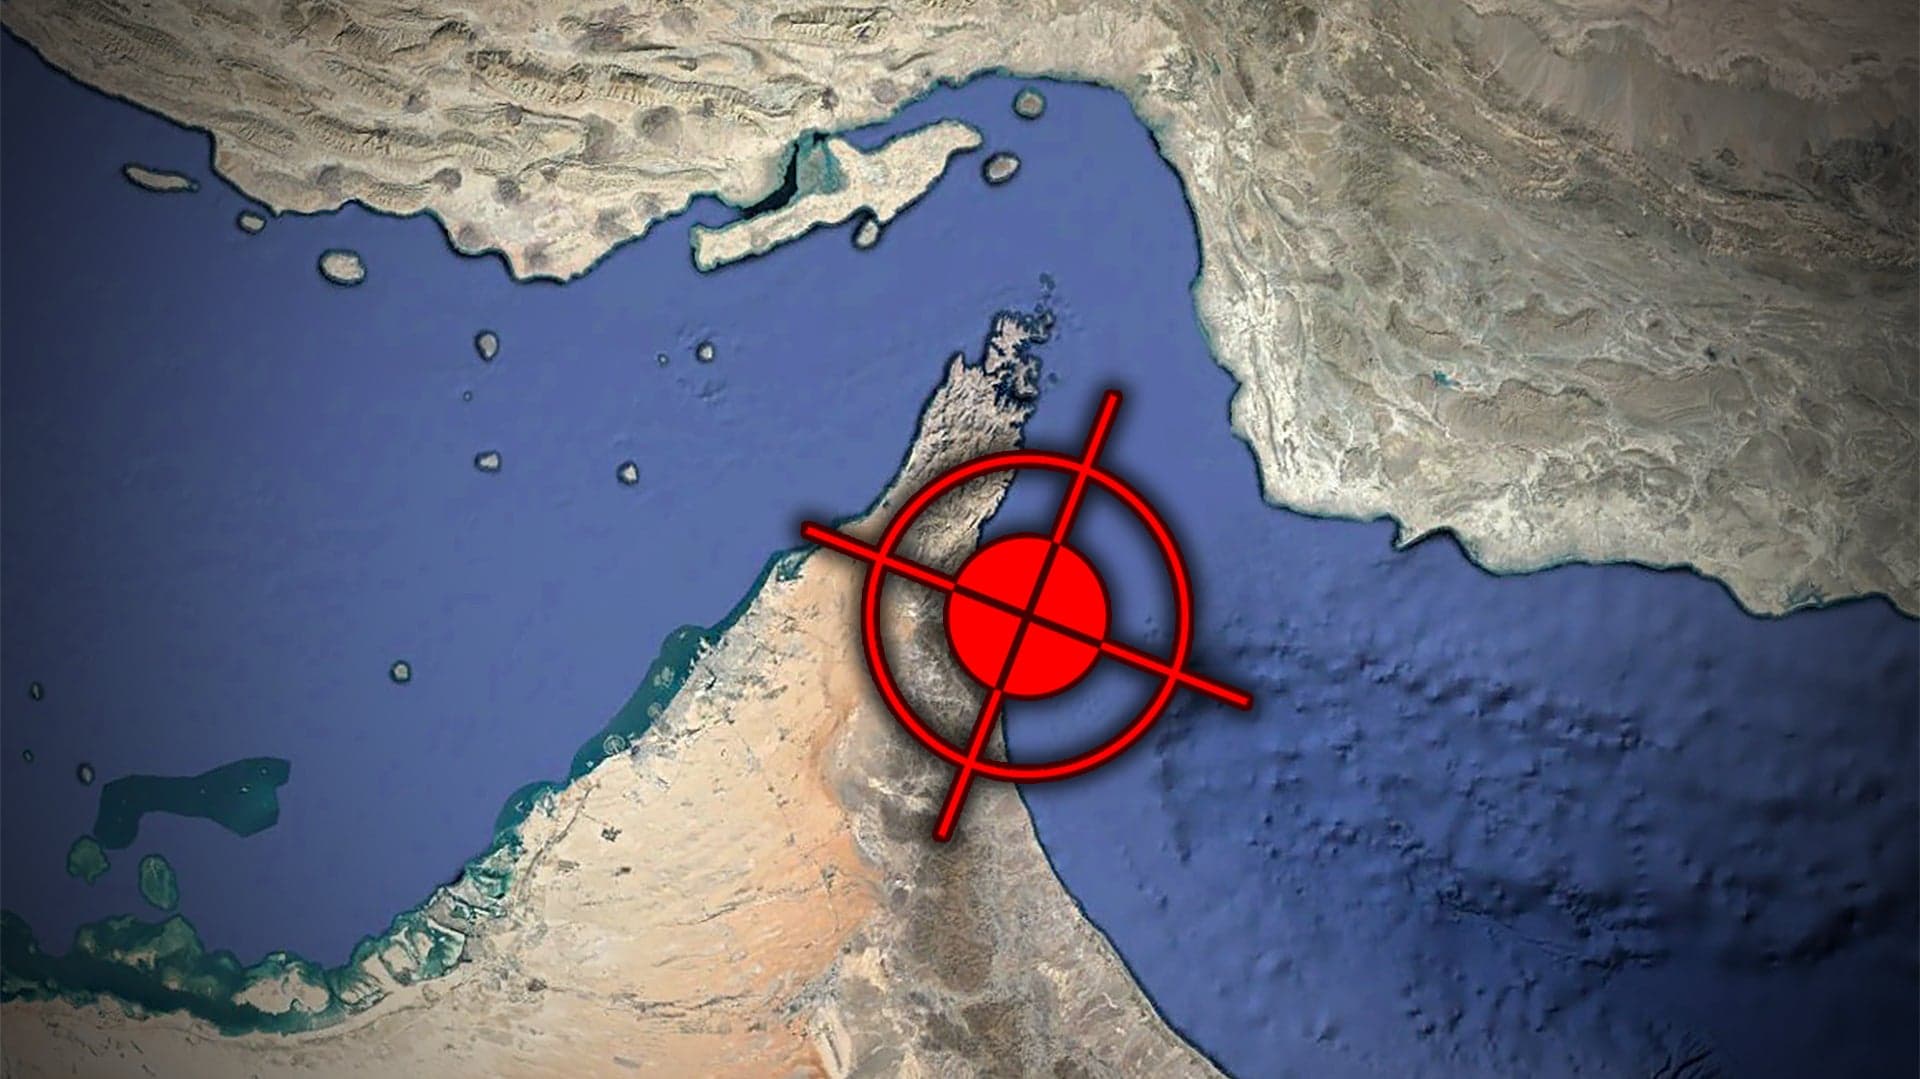 Oil Tankers Supposedly Attacked In Persian Gulf As U.S. Carrier Group Approaches (Updated)